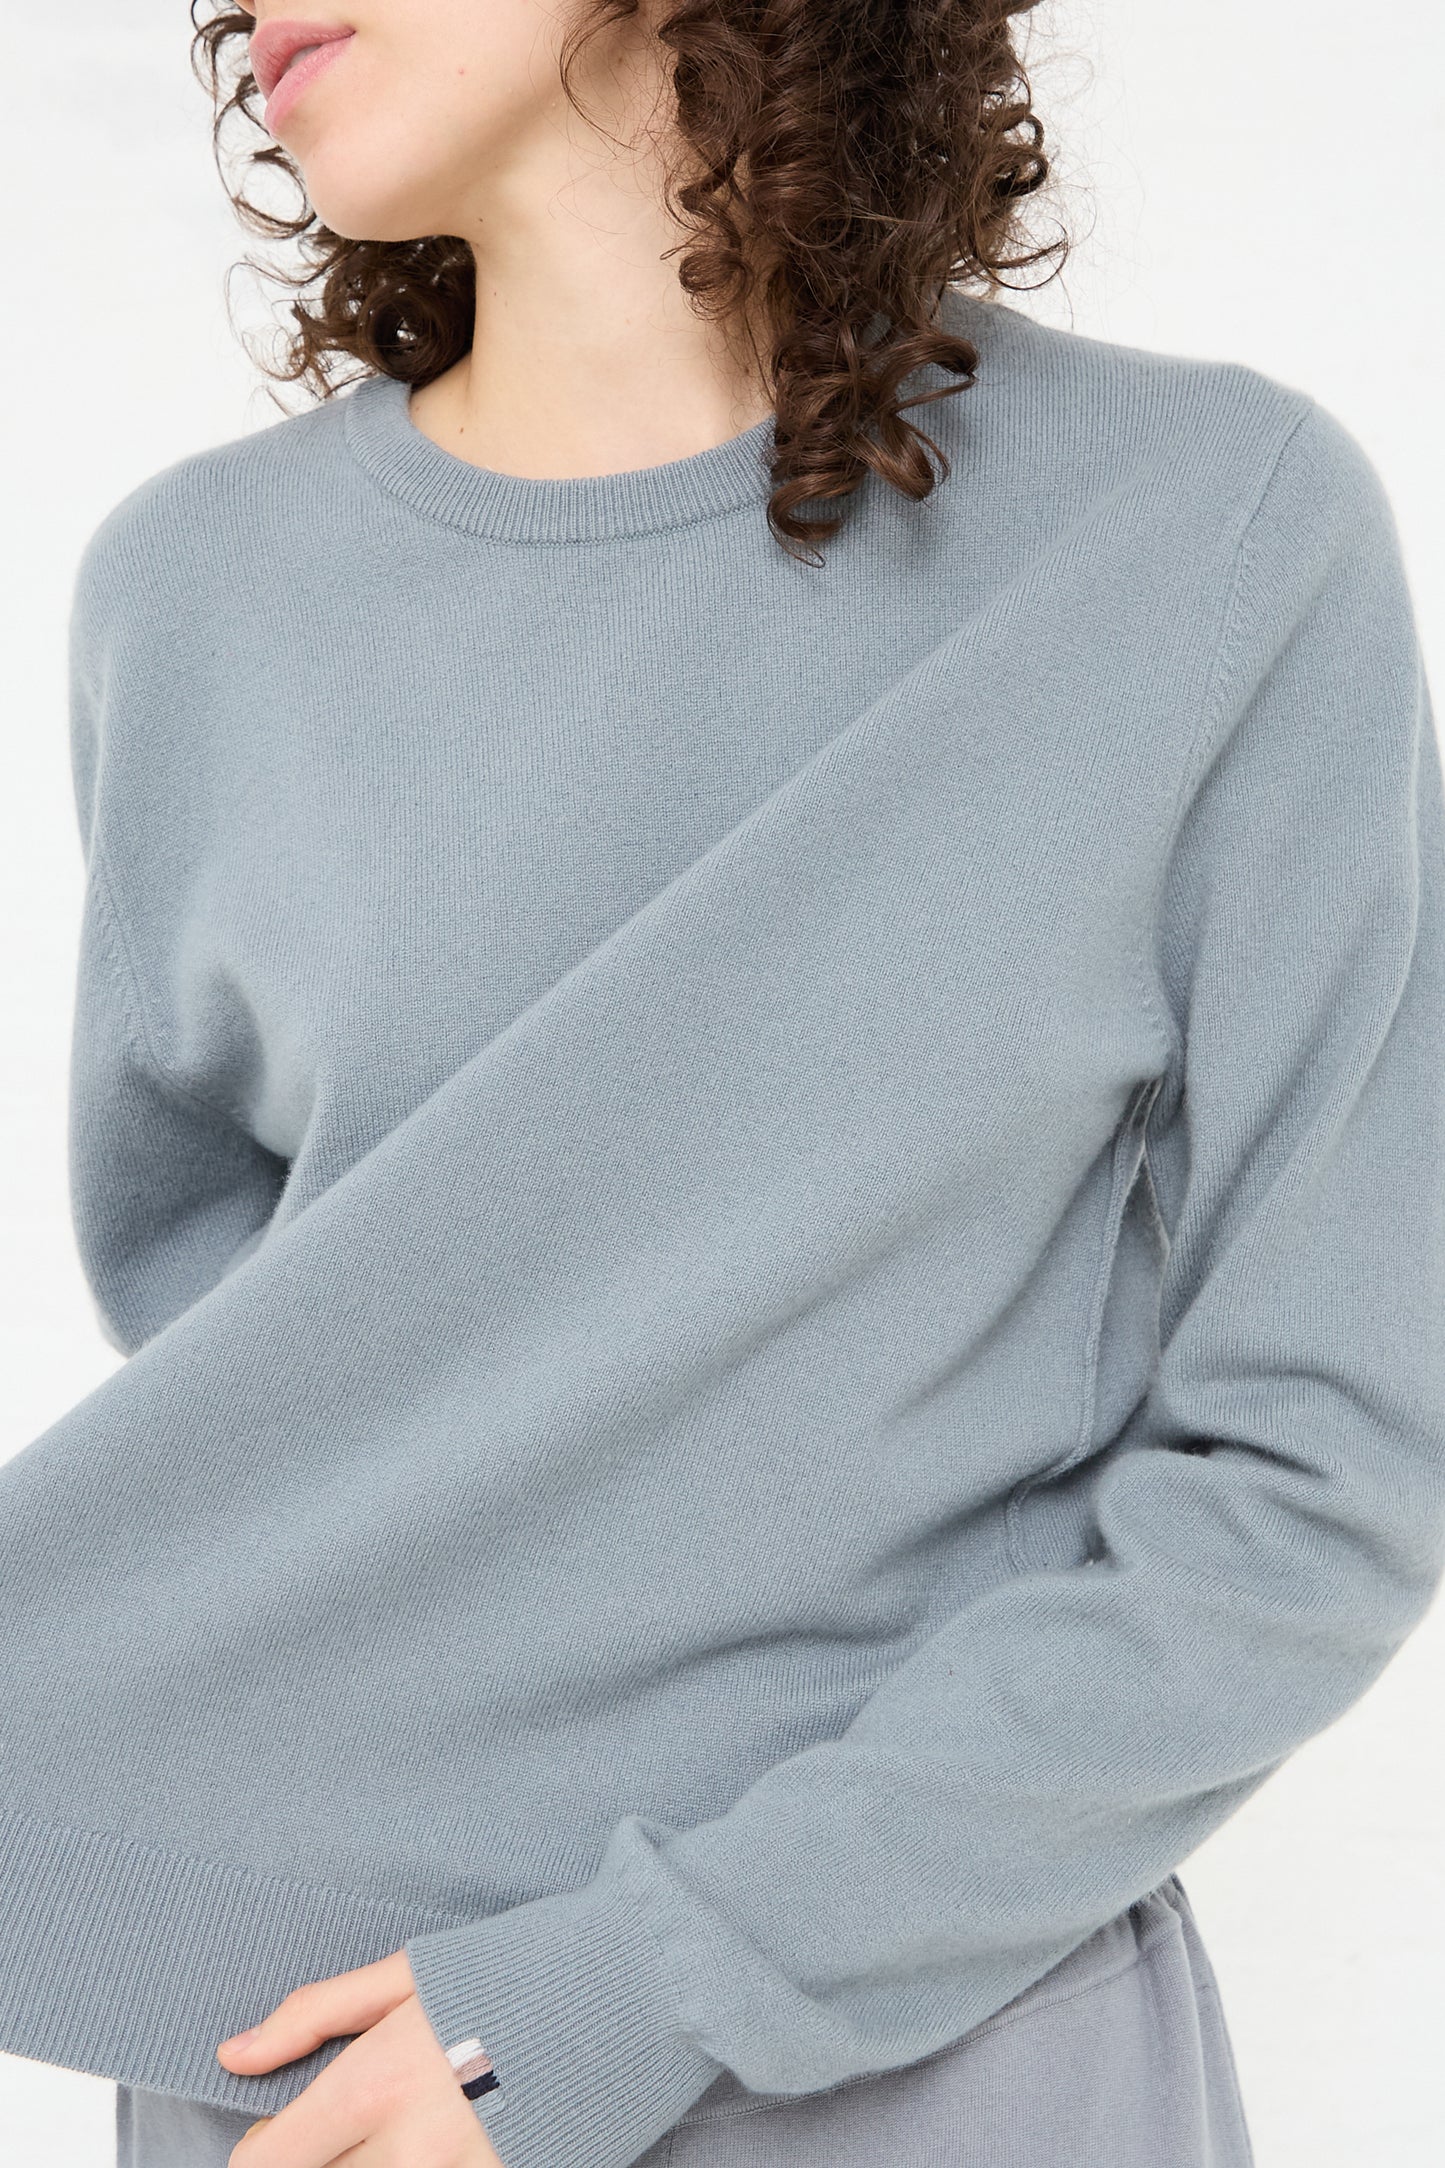 The model is wearing a No. 36 Be Classic Sweater in Sage by Extreme Cashmere.